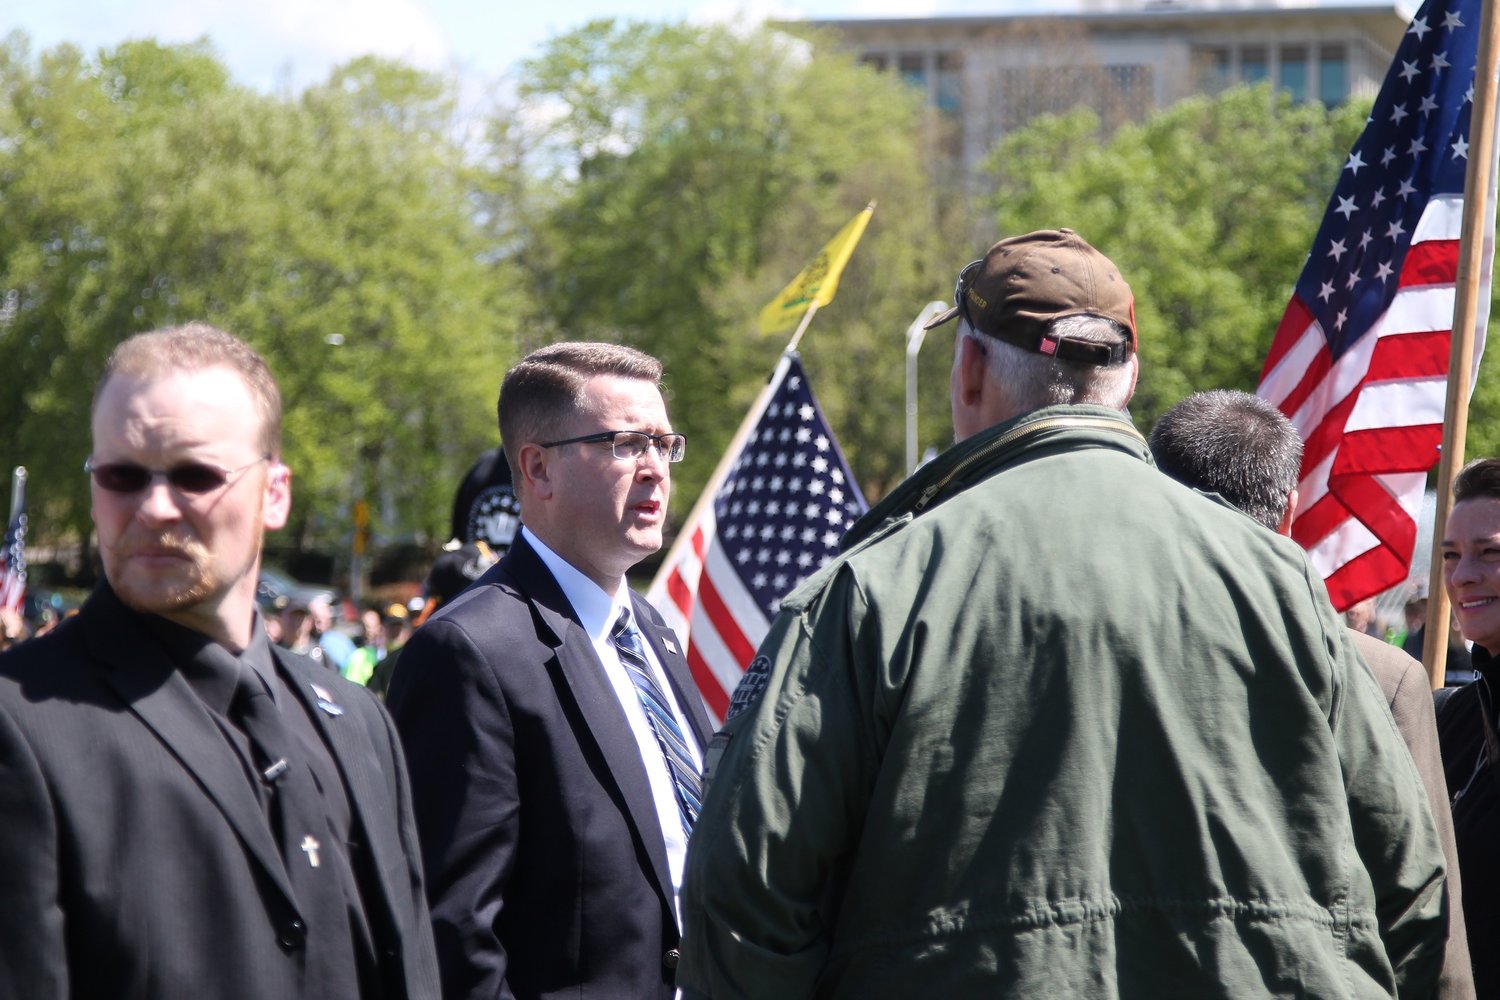 Rep. Matt Shea, R-Spokane Valley, speaks to attendees, while flanked by security guards, at the “March for Our Rights” rally in Olympia on April 27. 